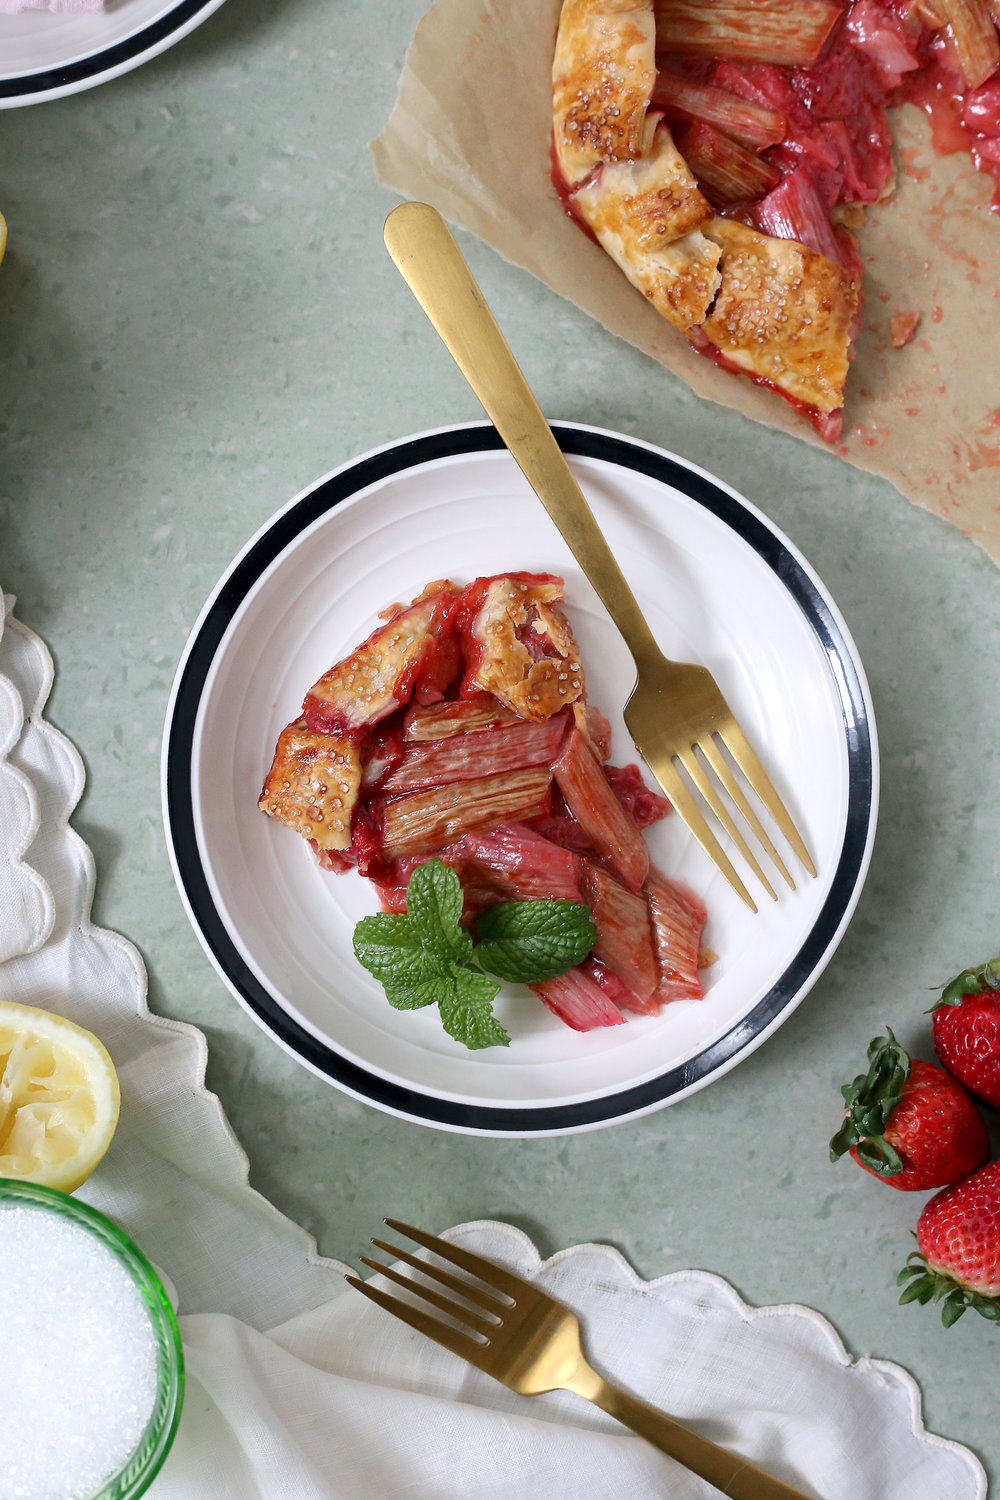 A slice of spring. Get the recipe for this Strawberry Rhubarb Galette via UnusuallyLovely.com